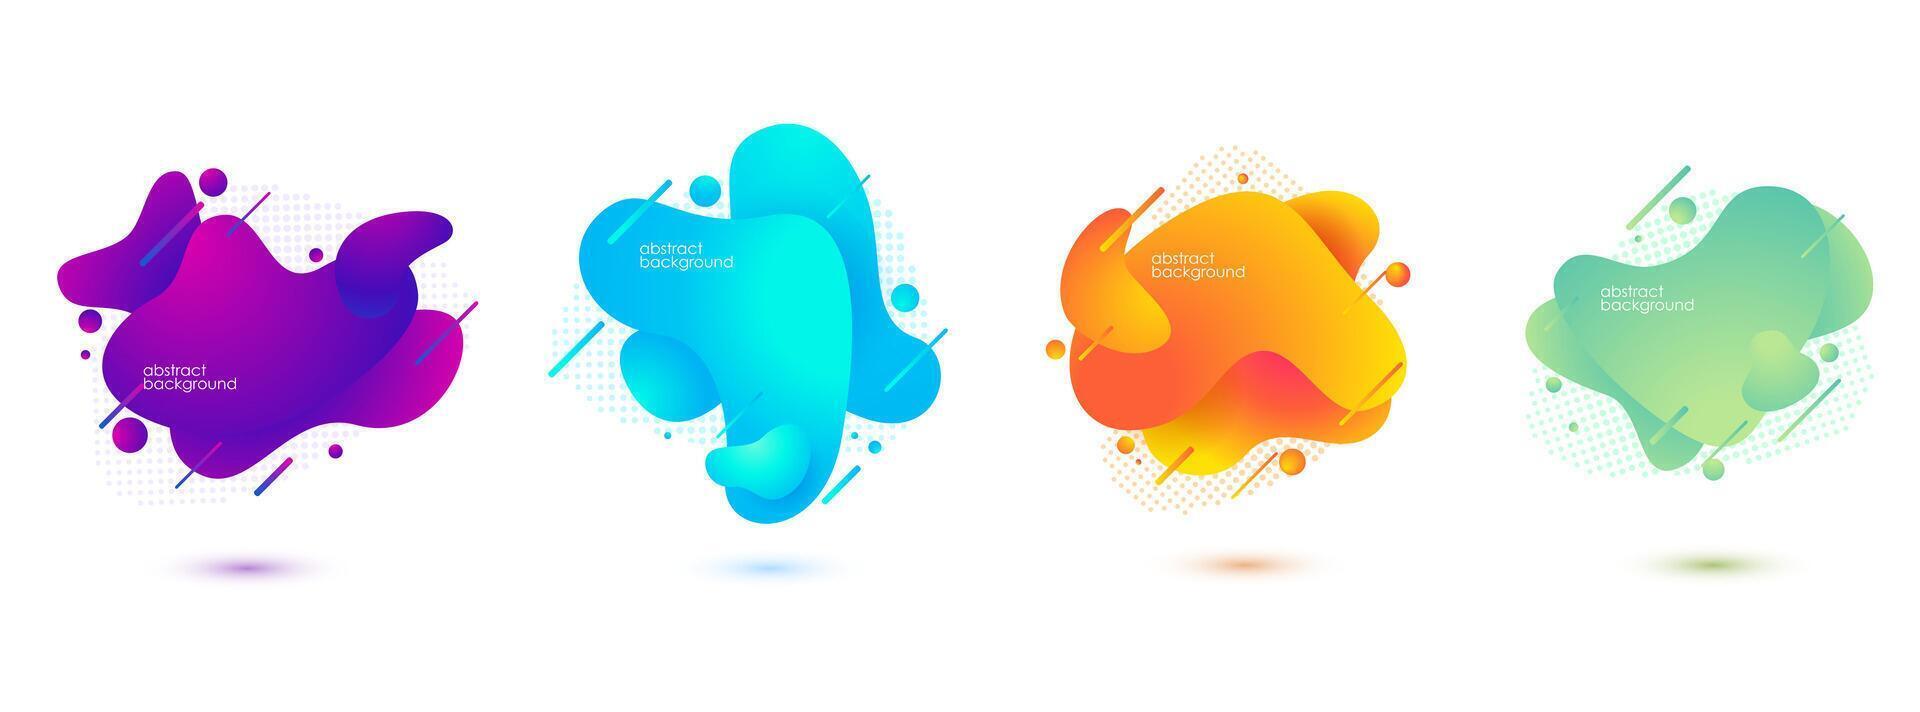 Gradient Abstract Banners with Flowing Liquid Shapes. Template For The Design of A Logo, Flyer Or Presentation, Vector Illustration